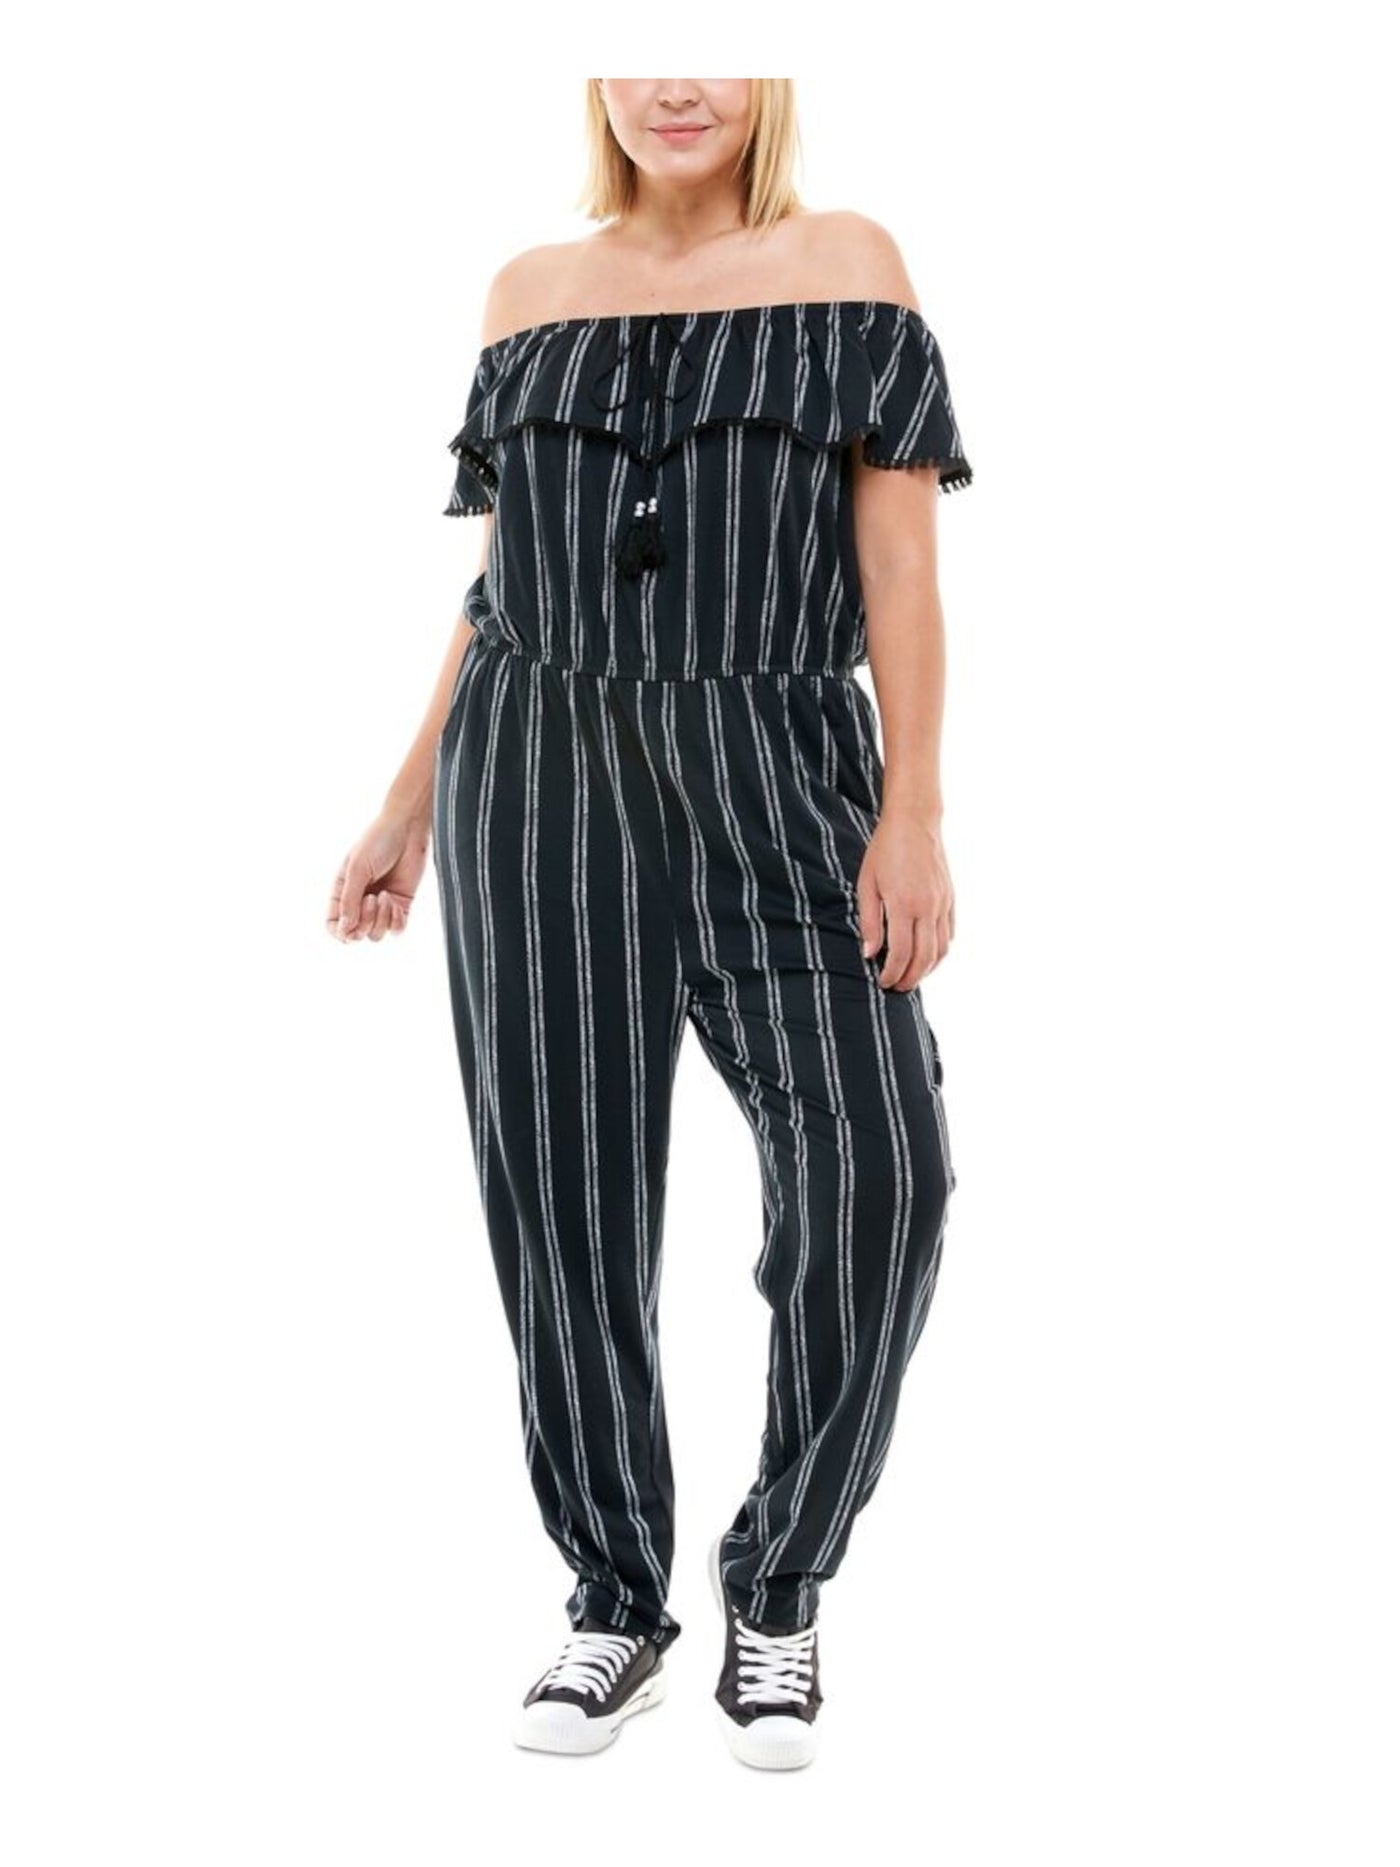 PLANET GOLD PLUS Womens Black Gathered Pocketed Pull-on Styling Striped Off Shoulder Straight leg Jumpsuit Plus 3X